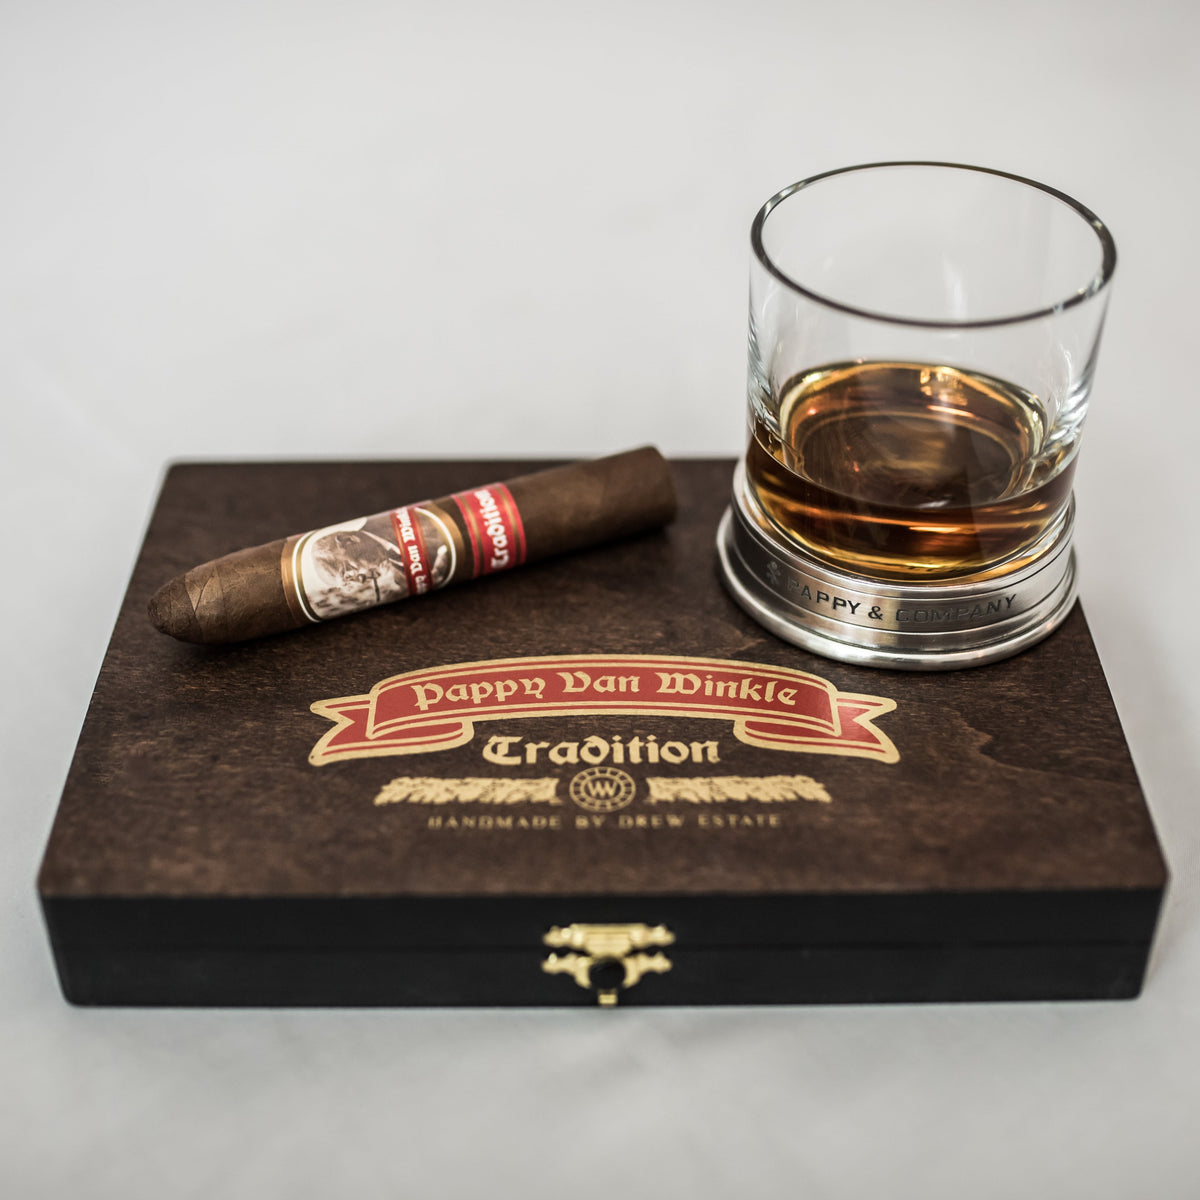 Pappy Van Winkle Tradition Cigars: Belicoso (Box of 10)